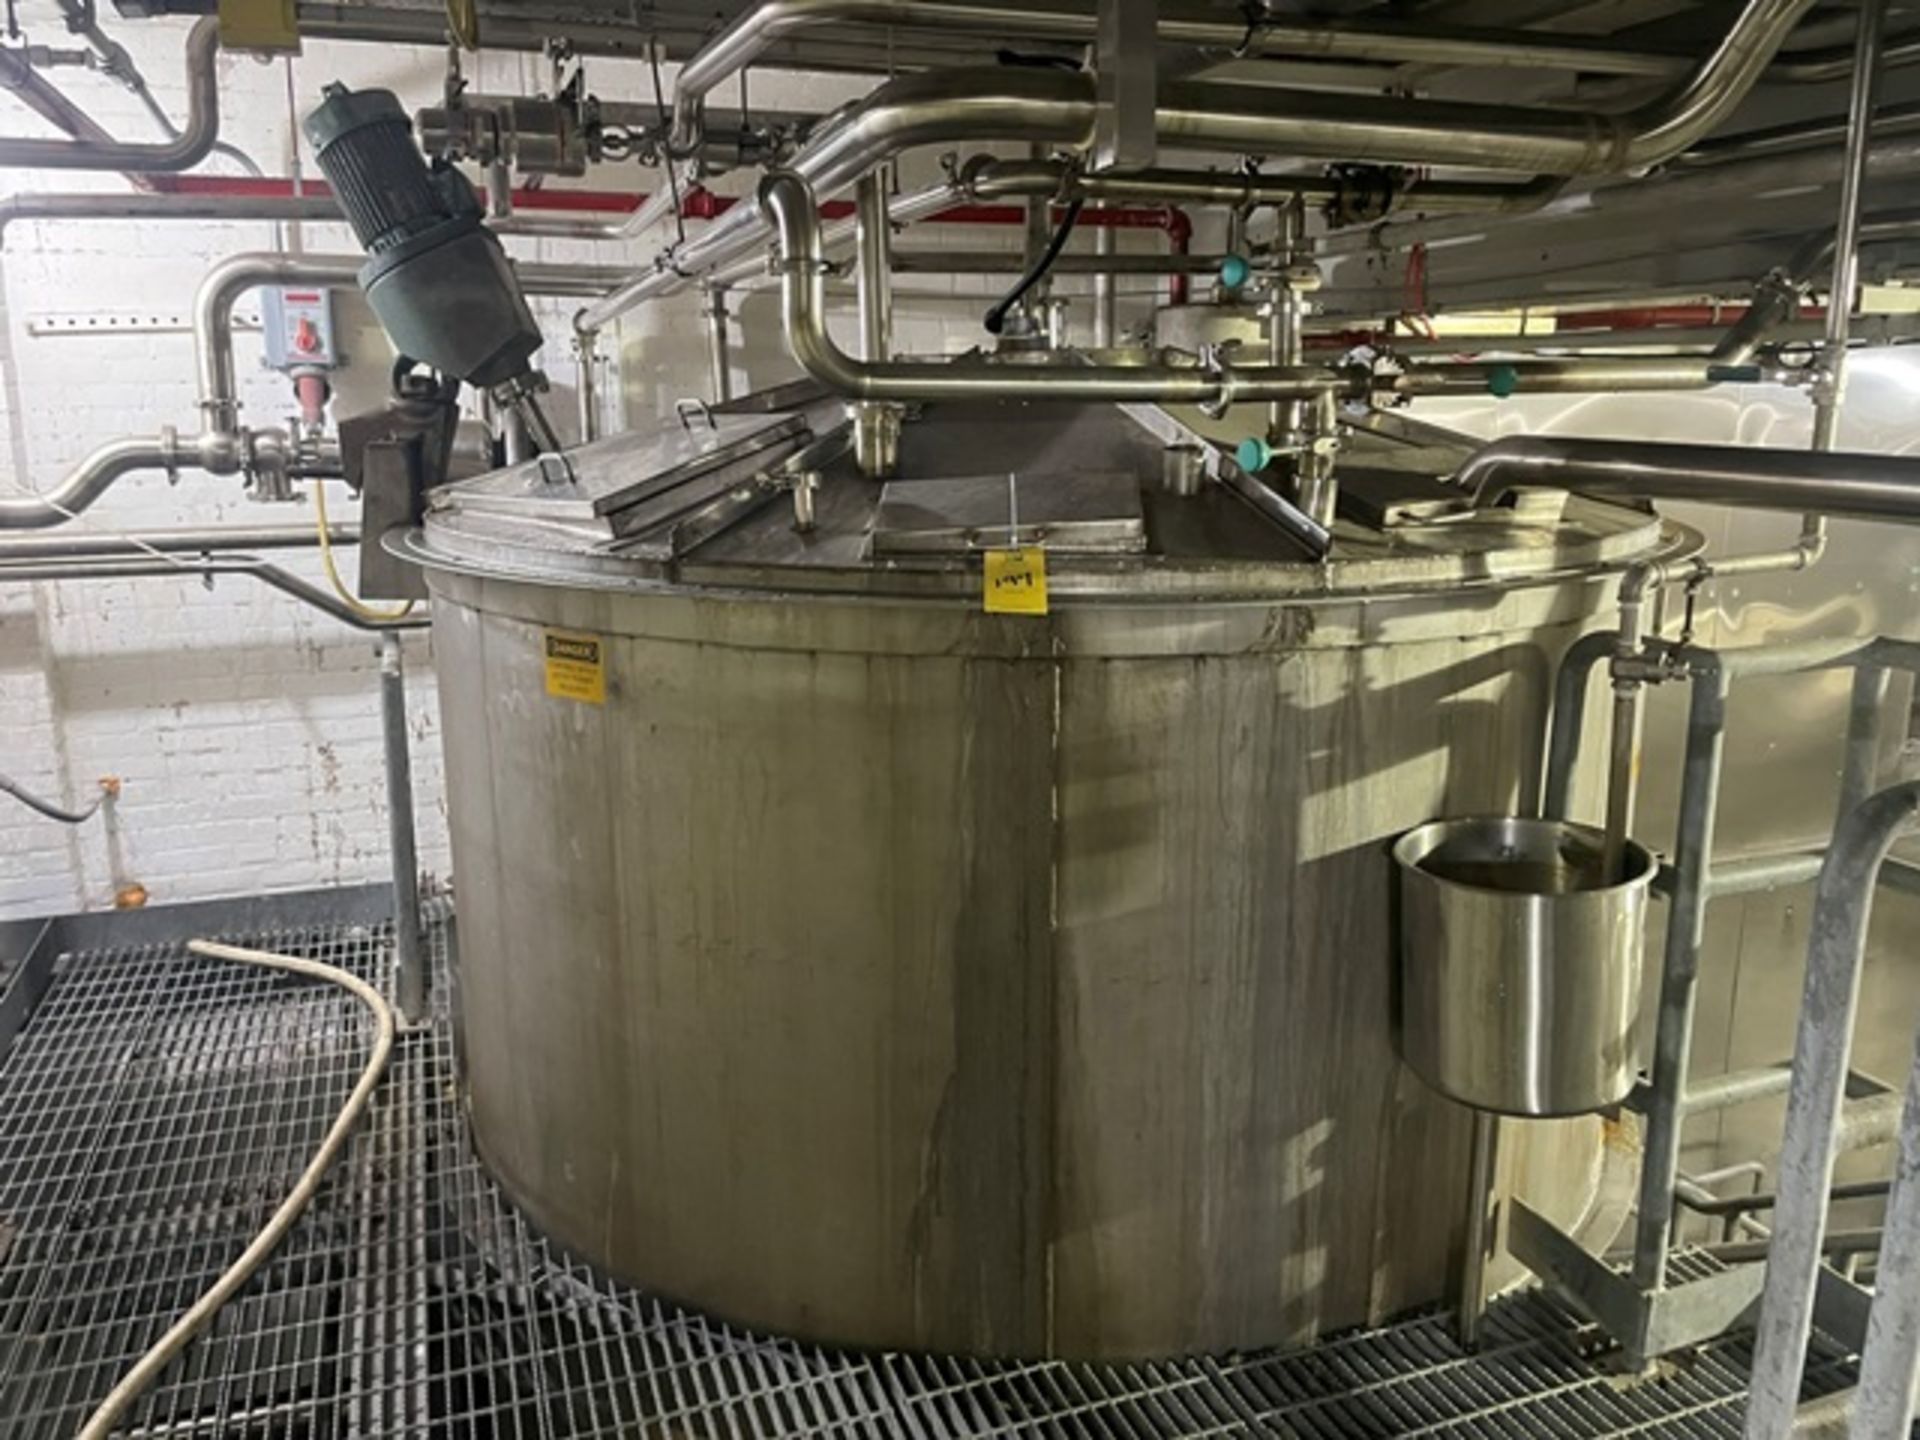 Stainless Steel Tank, Approx. 84" Diameter x 12', Includes Mixer, Rigging & Loading Fee: $4000